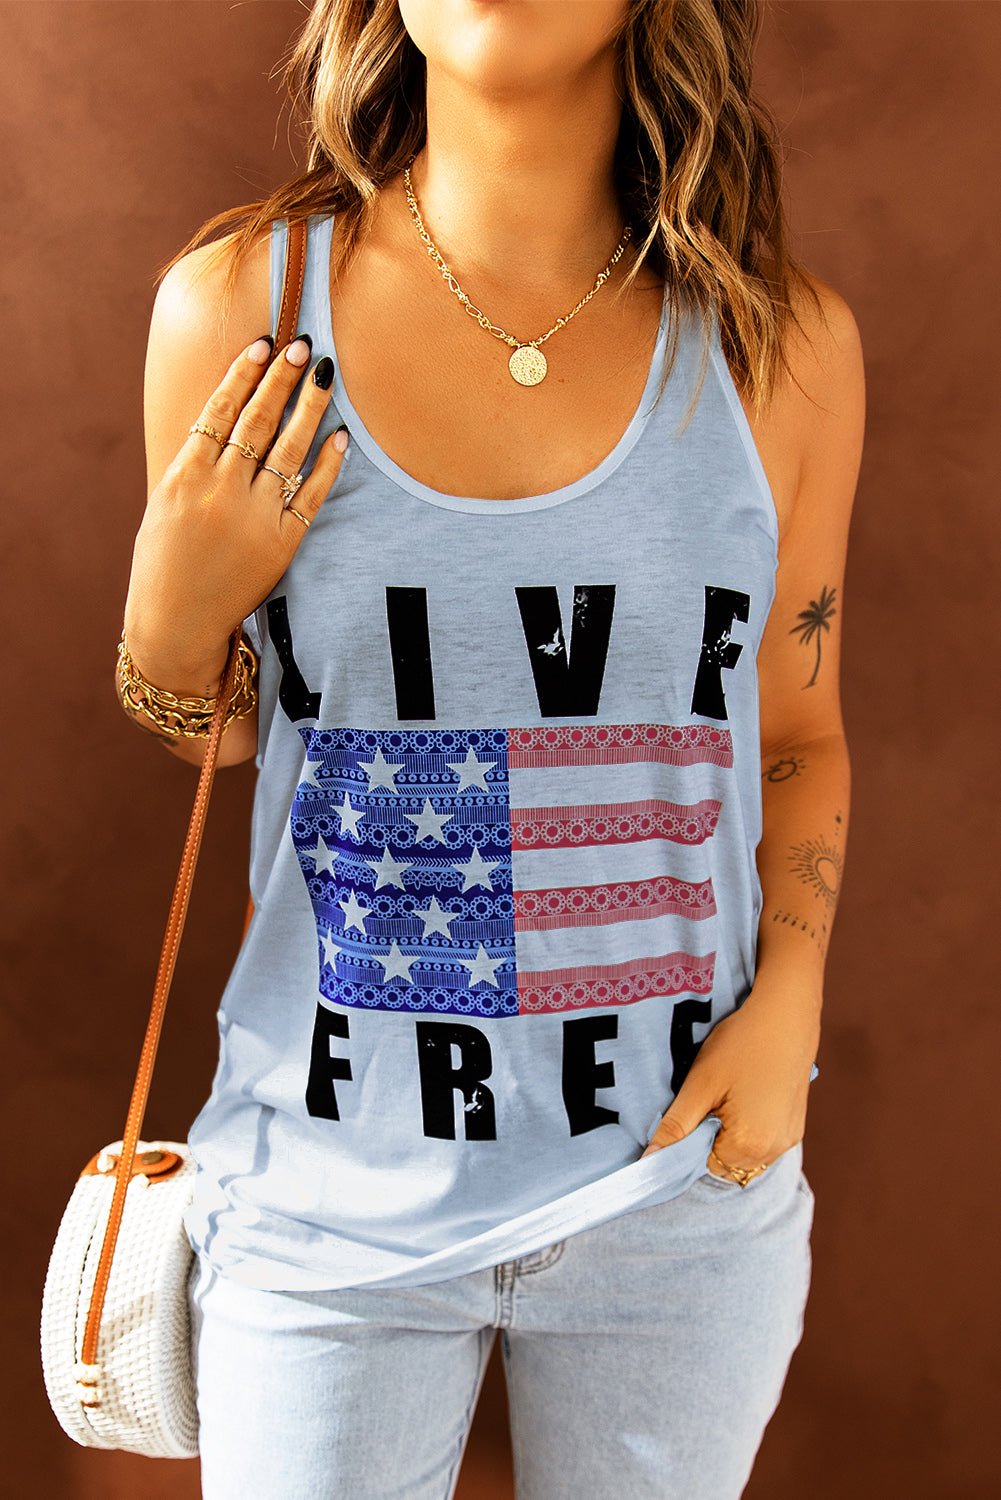 LIVE FREE Stars and Stripes Graphic Tank - OMG! Rose